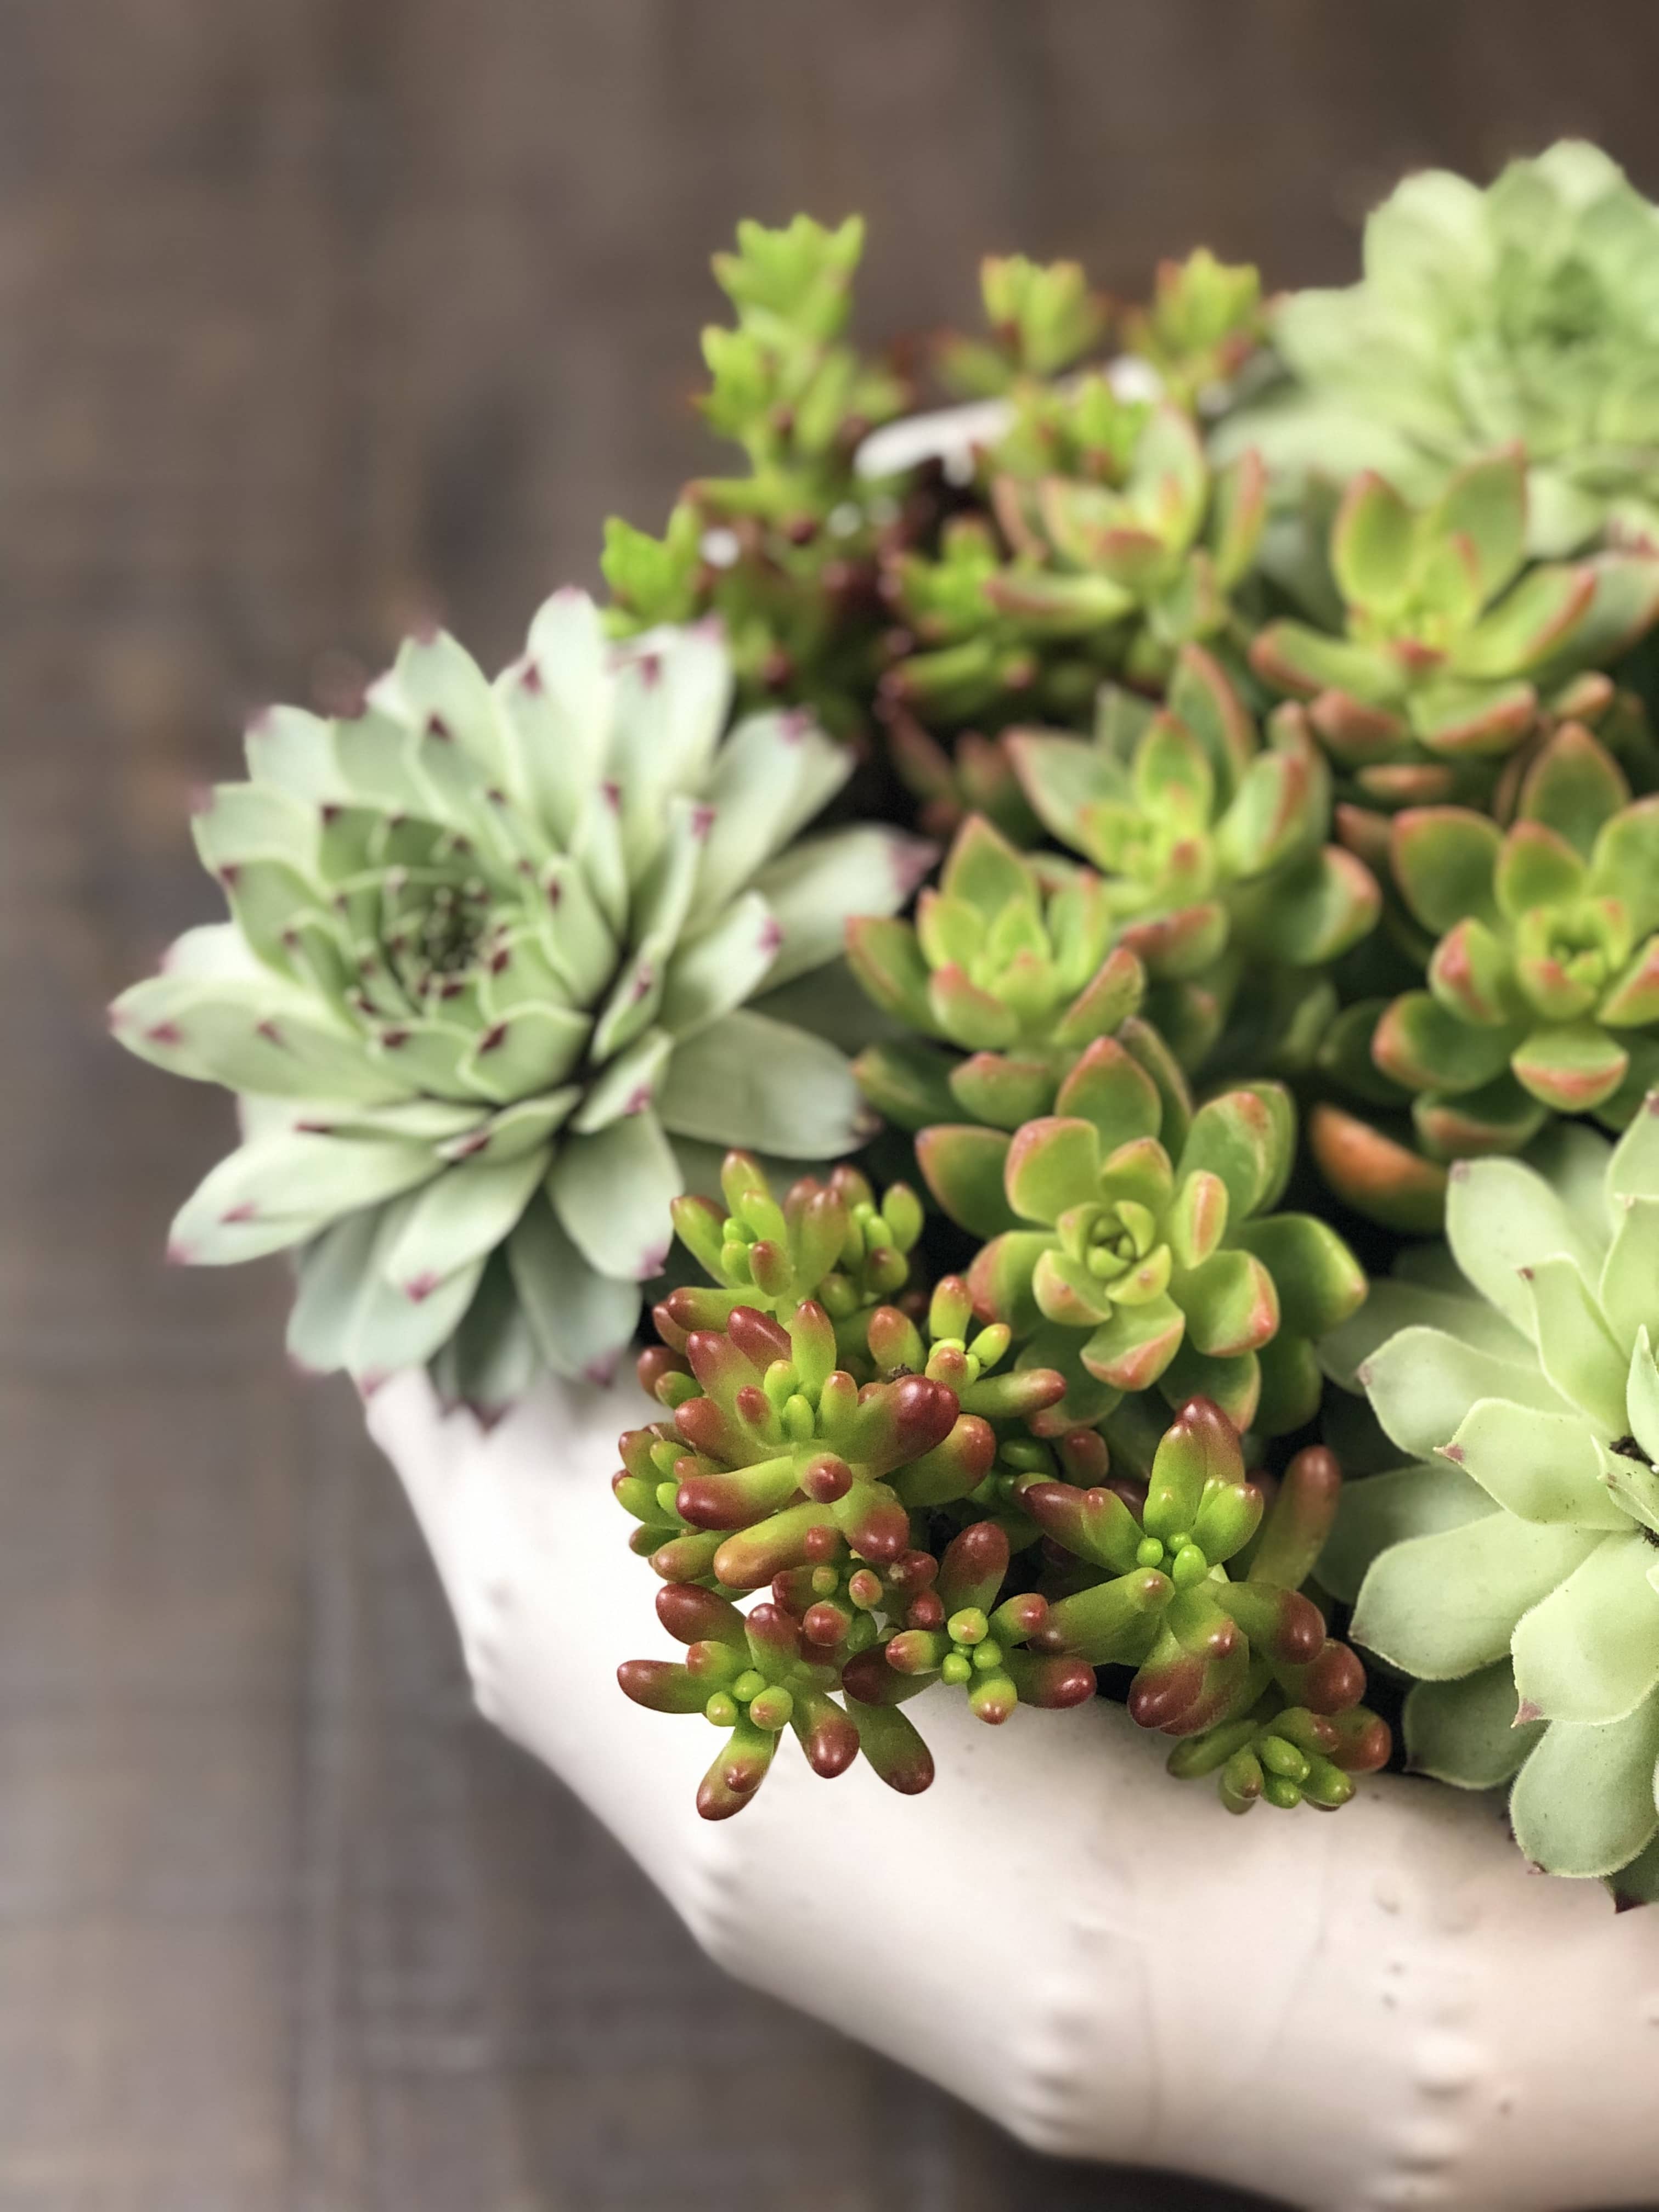 How to Care for Hens and Chicks Succulents